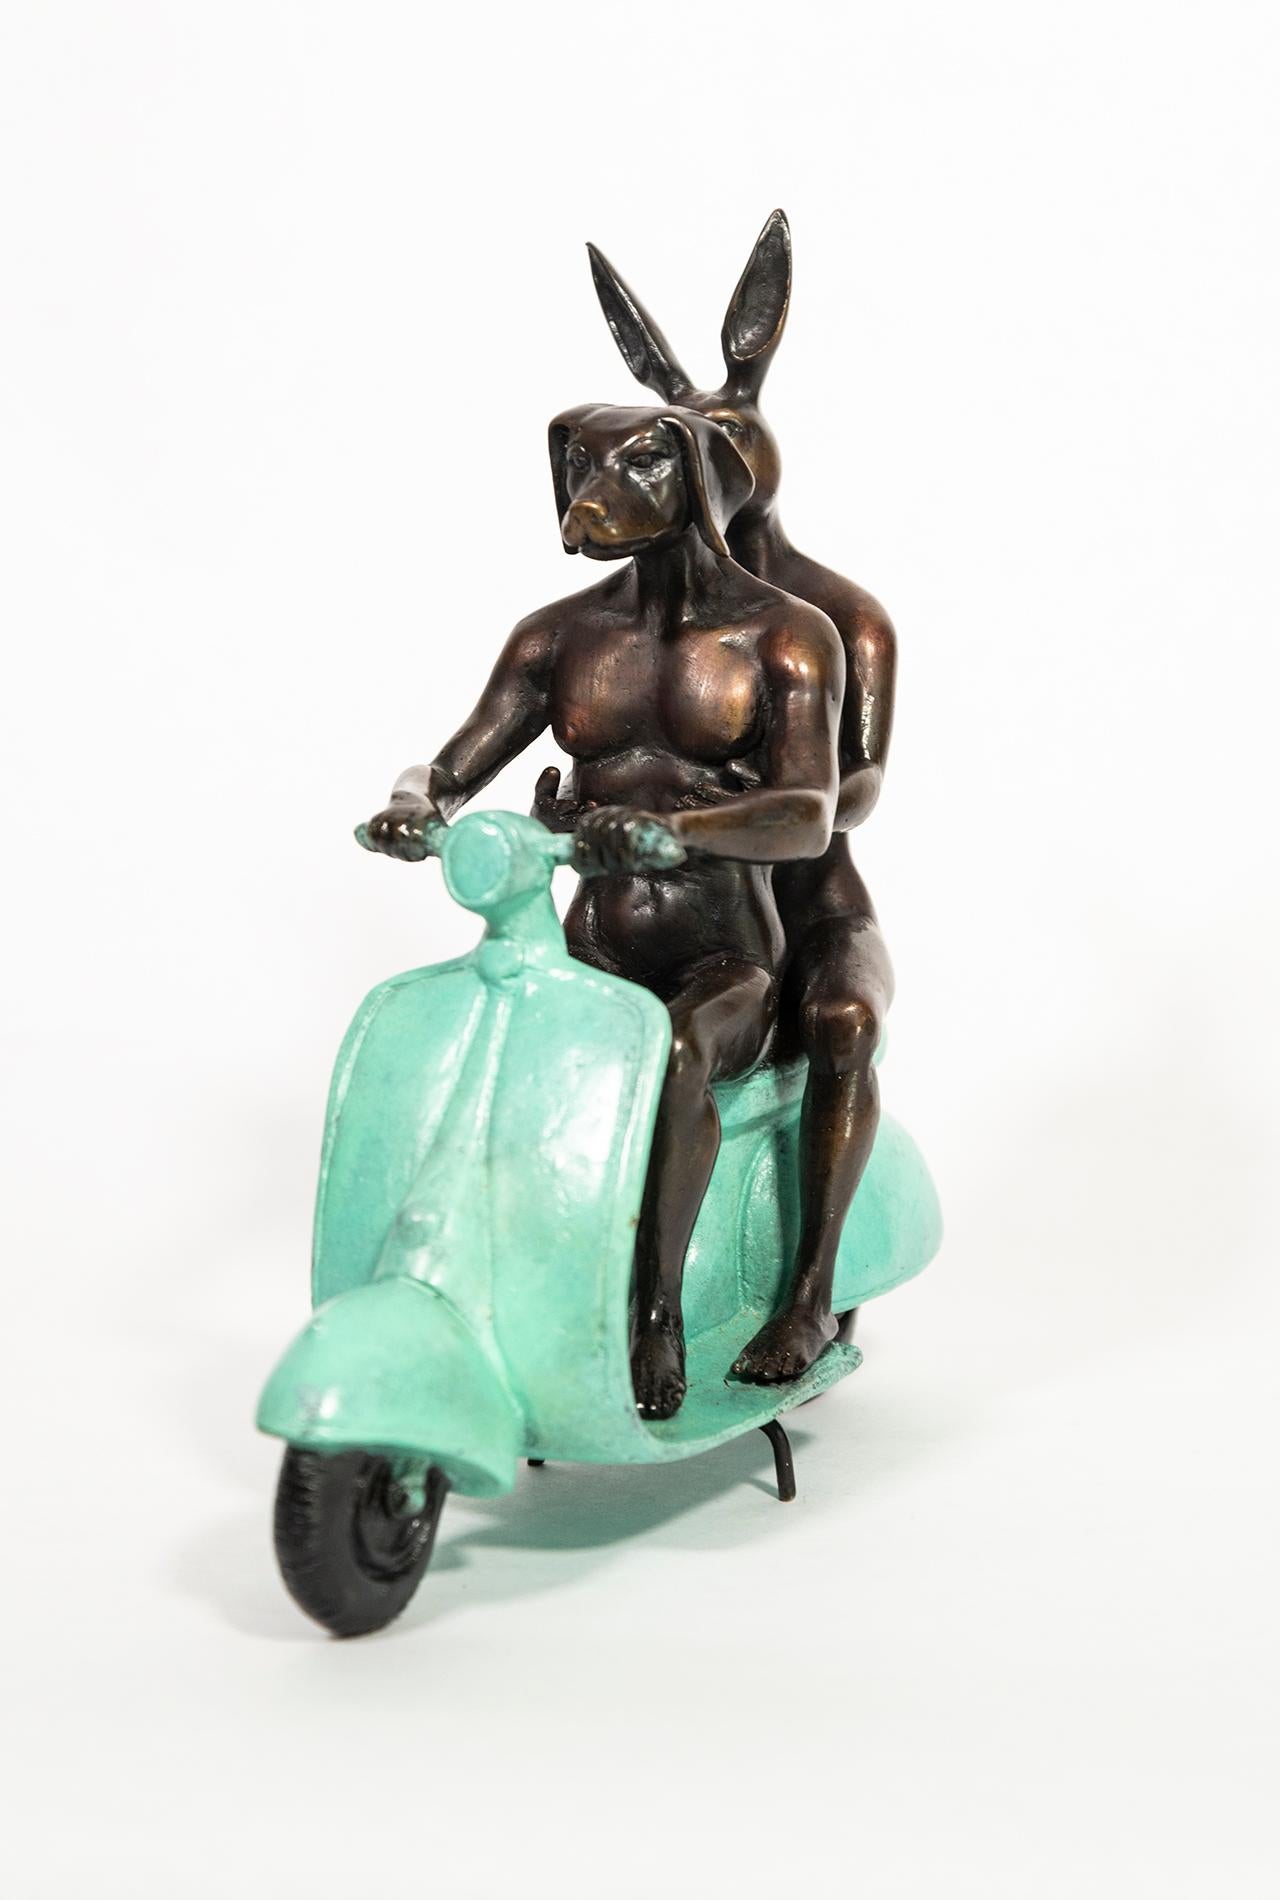 Australia’s Gillie and Marc, the contemporary artist duo continue to create their popular, humourous dogman, rabbit-woman hybrid imagery in this new bronze sculpture. The playful human/animal figures represent the spiritual connection between